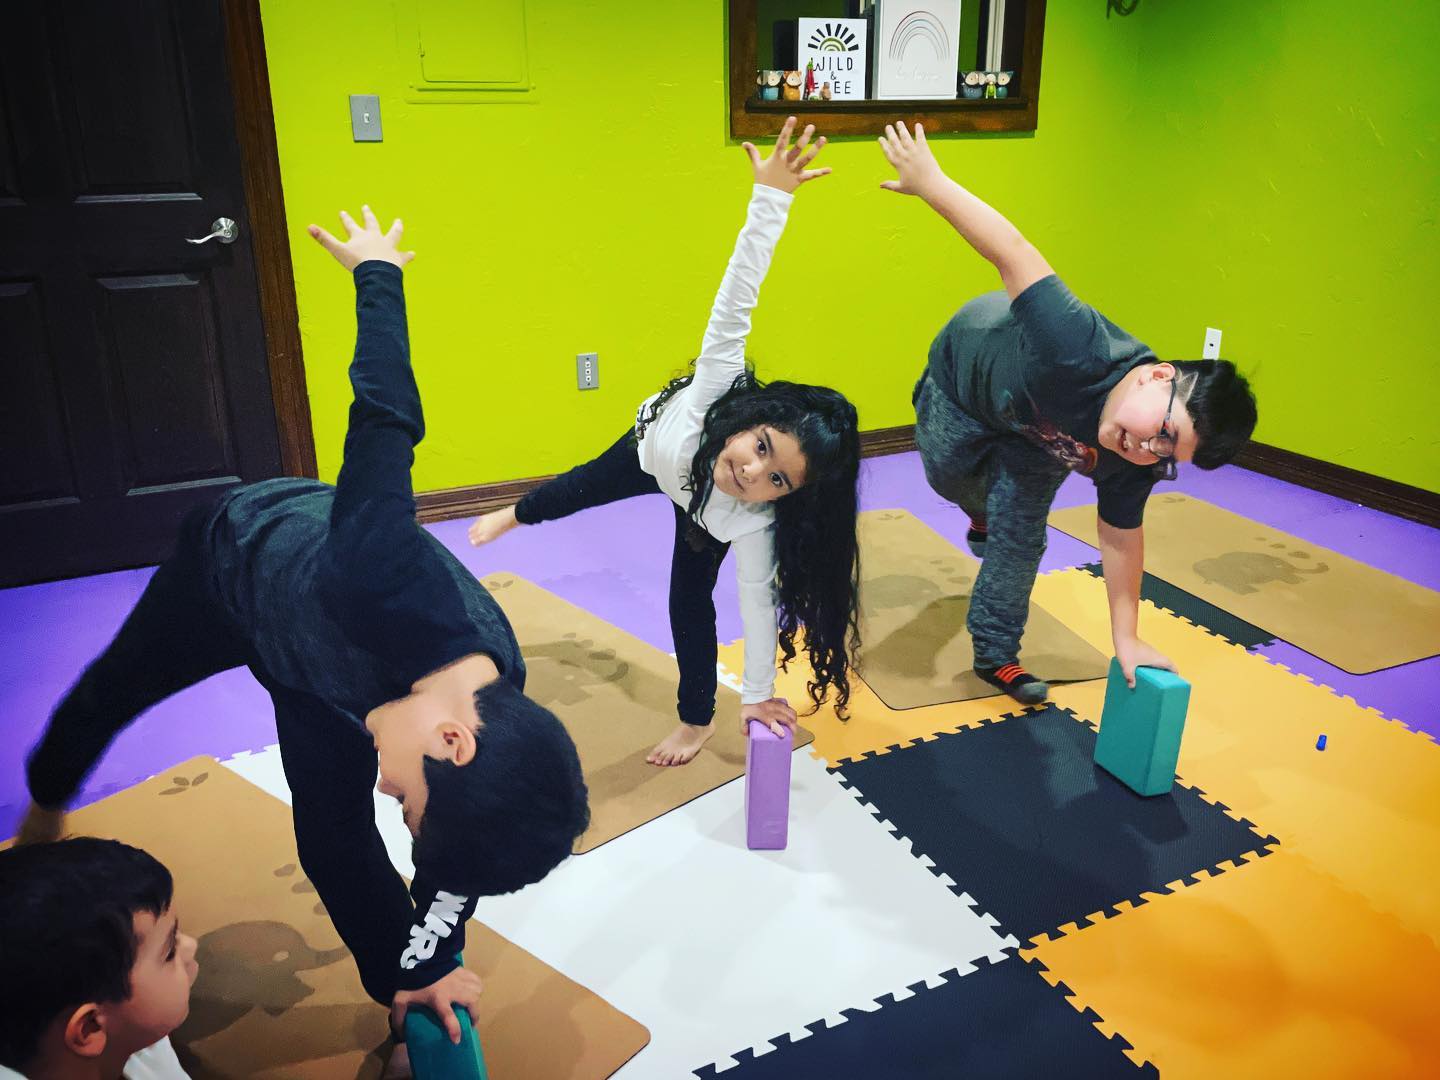 Proud of our #yogicubs for focusing on our peak pose of the week after our holiday break! Half moon pose requires so much body awareness as we engage our lower body & core muscles to find a moment of stability. They did amazing!

#mansfieldtx #dfwkids #yogaforkids #strongkids #balance #halfmoonpose #arlingtontx